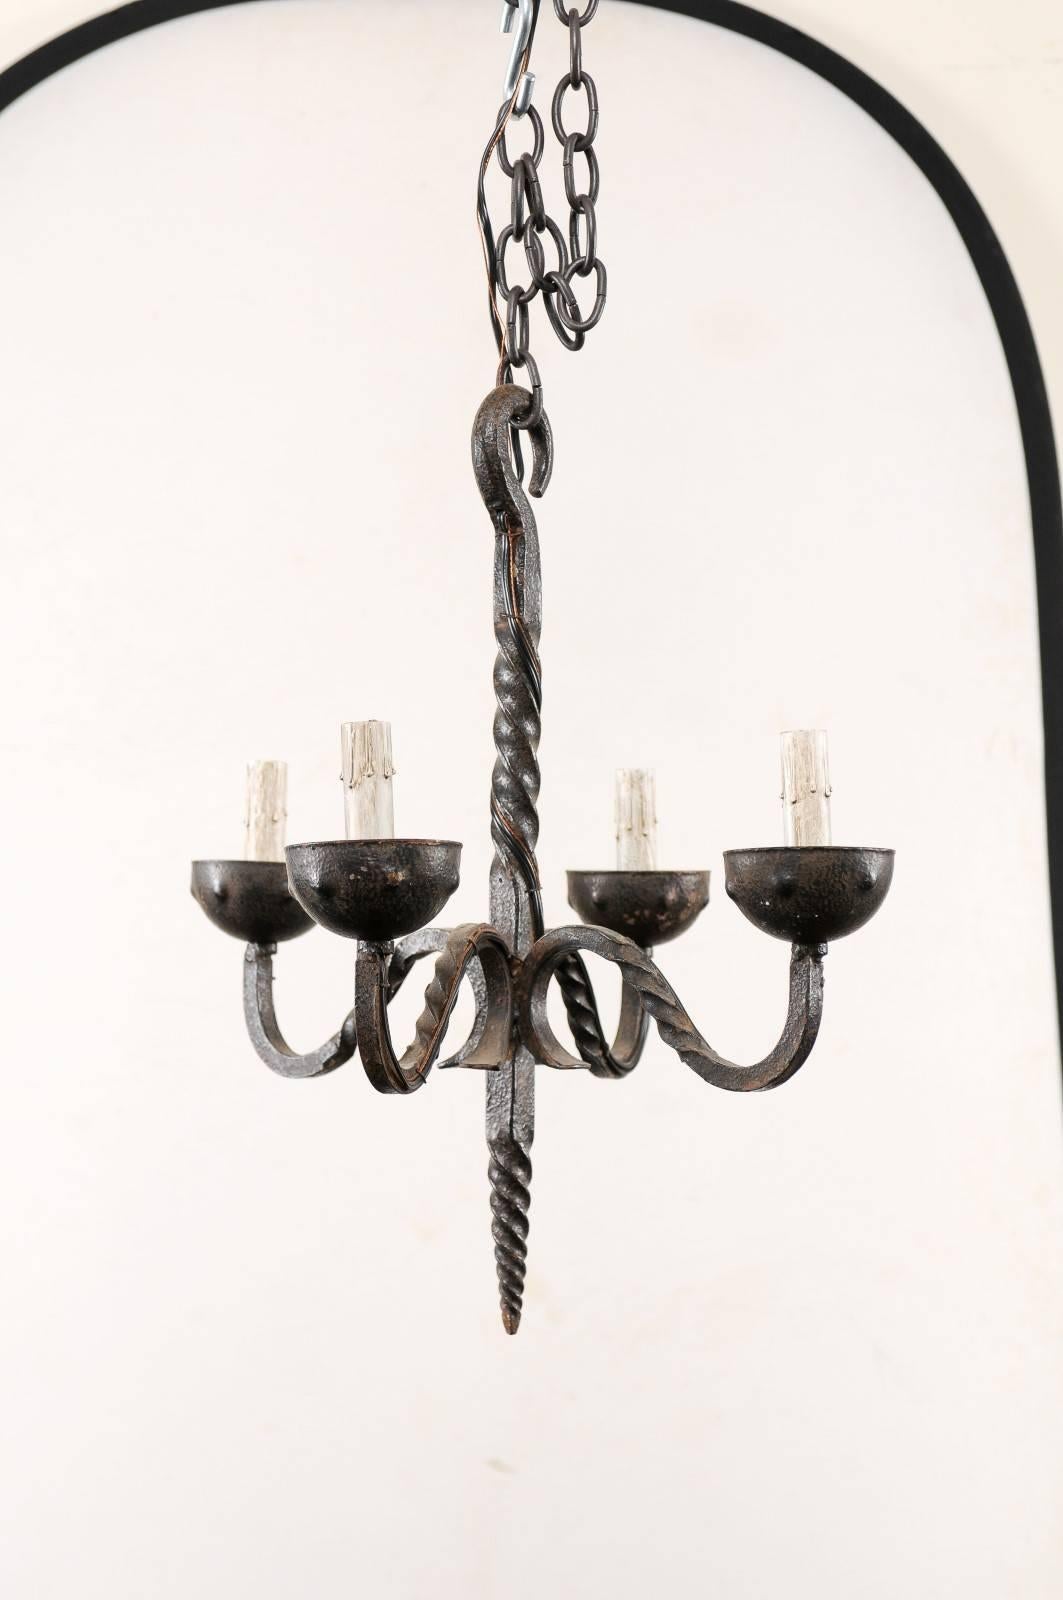 Patinated French Vintage Wrought Iron Four-Light Chandelier with Twisted Central Column